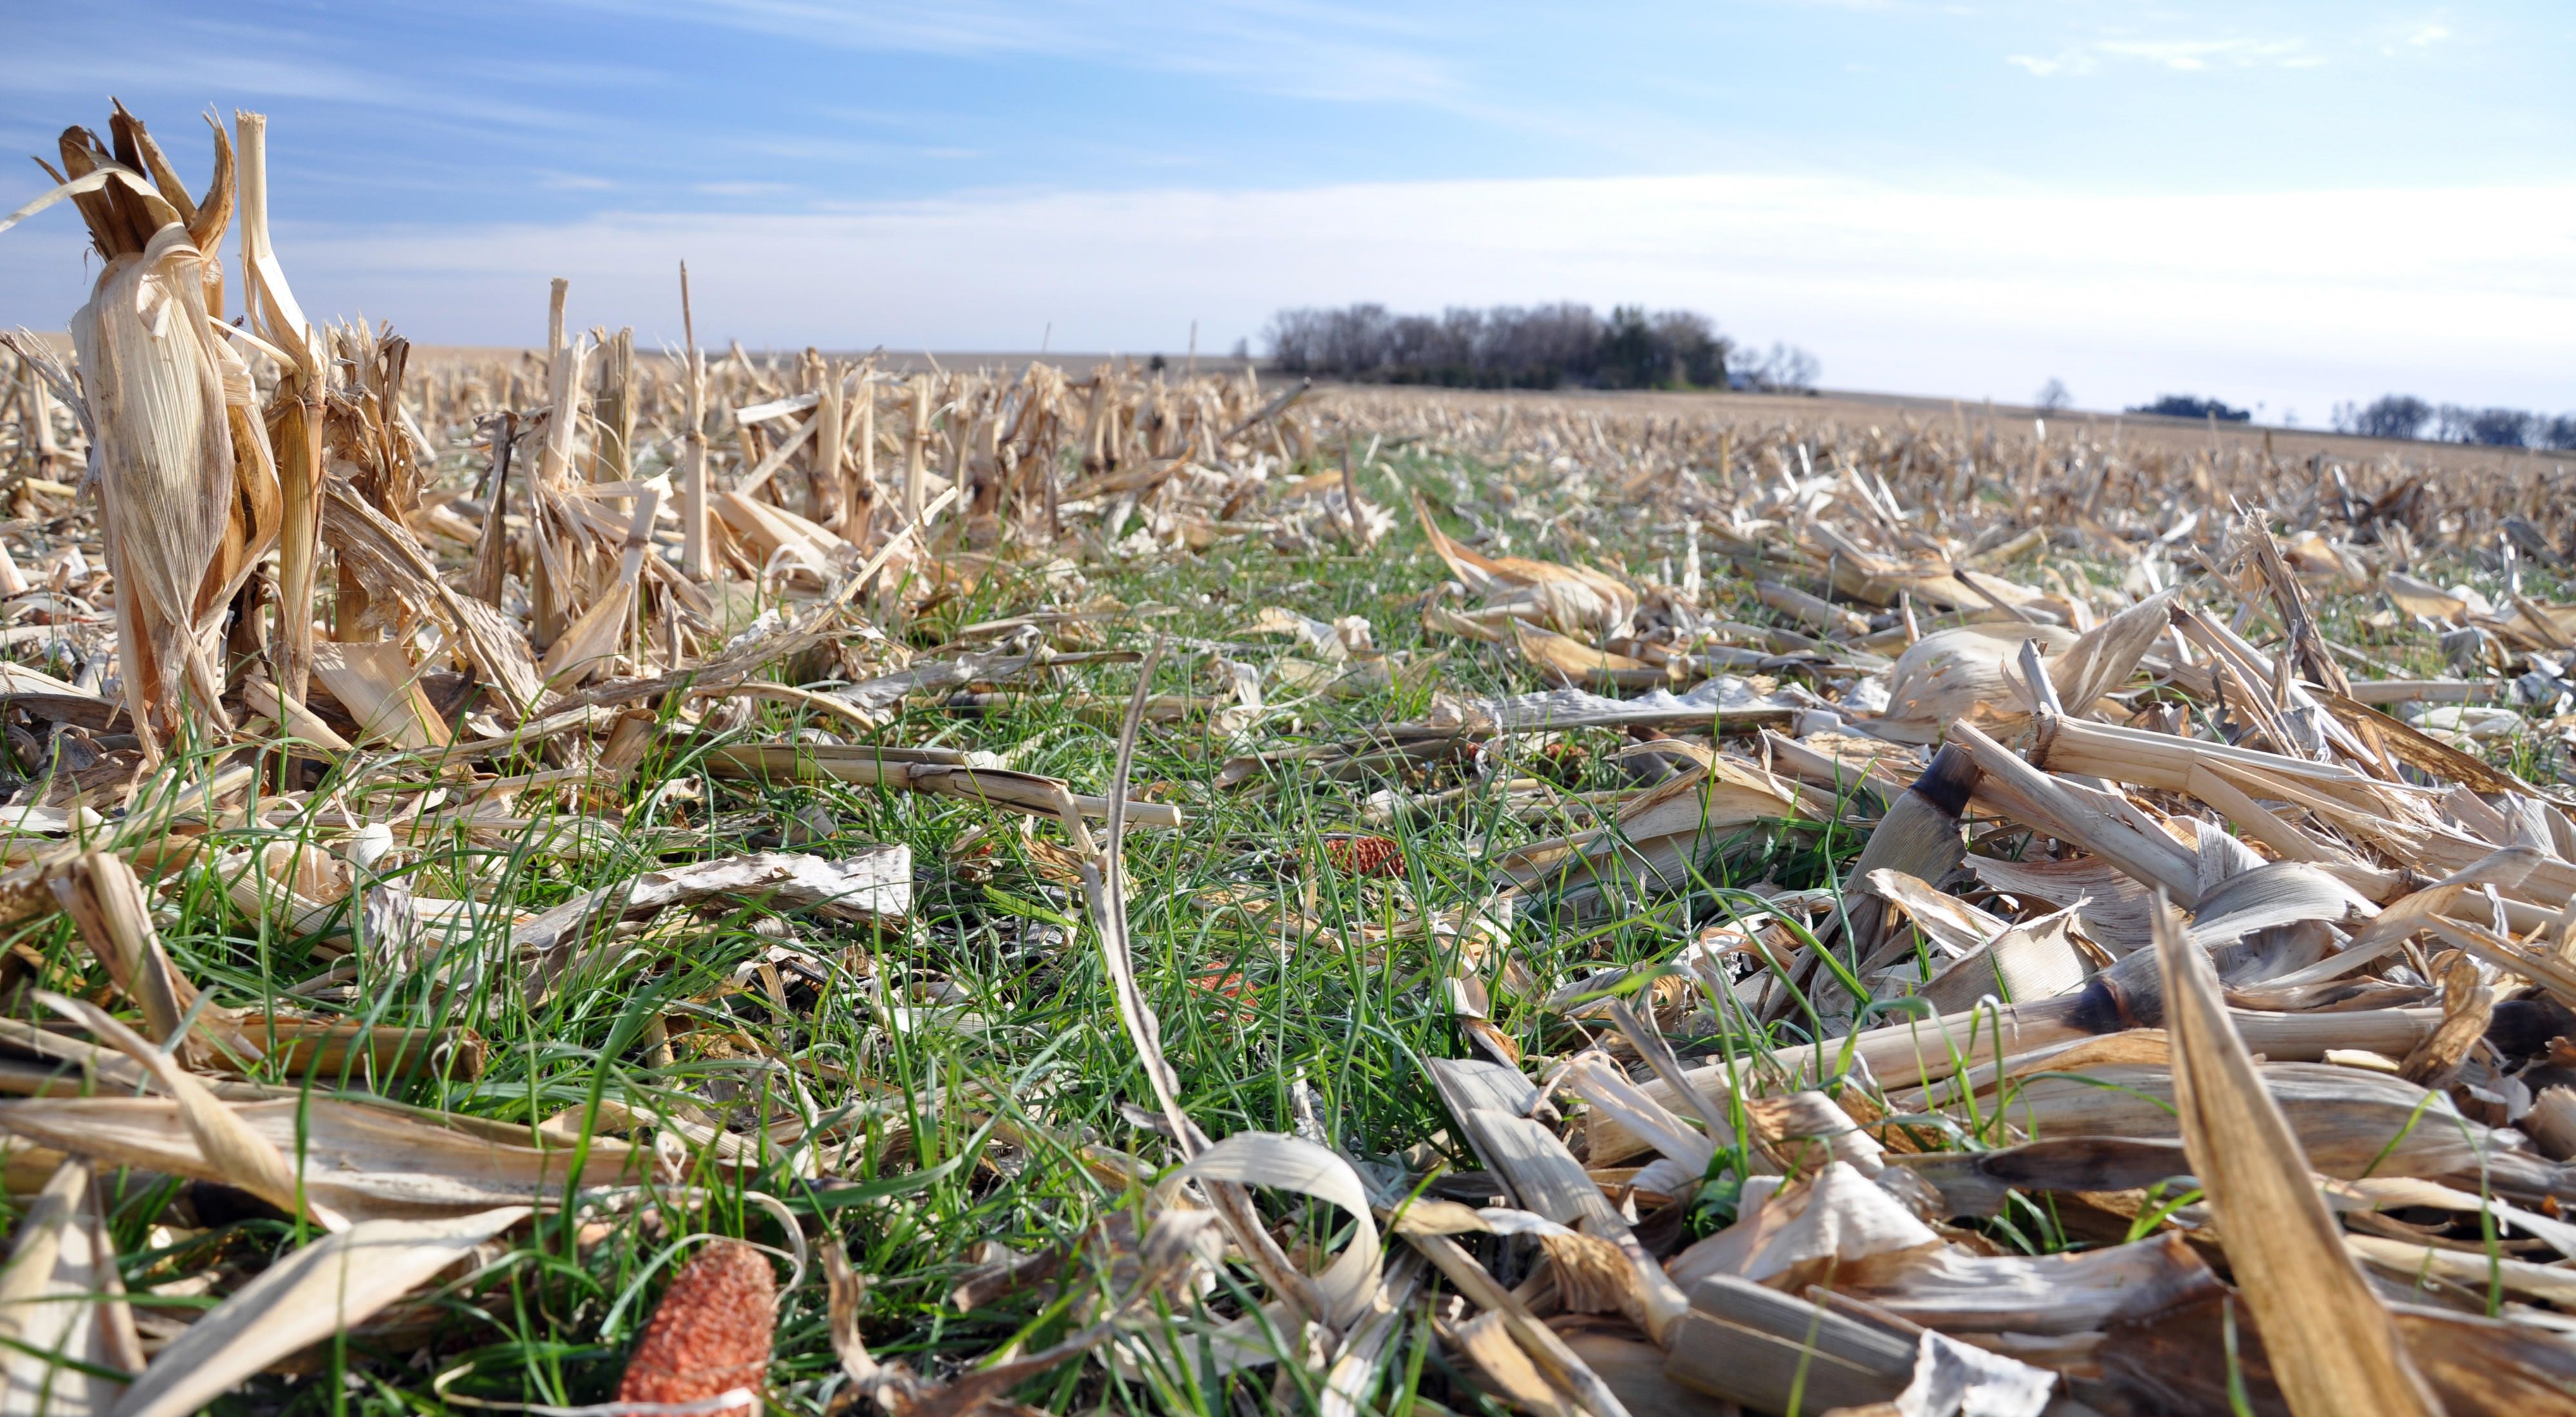 Rye cover crops in corn residue.